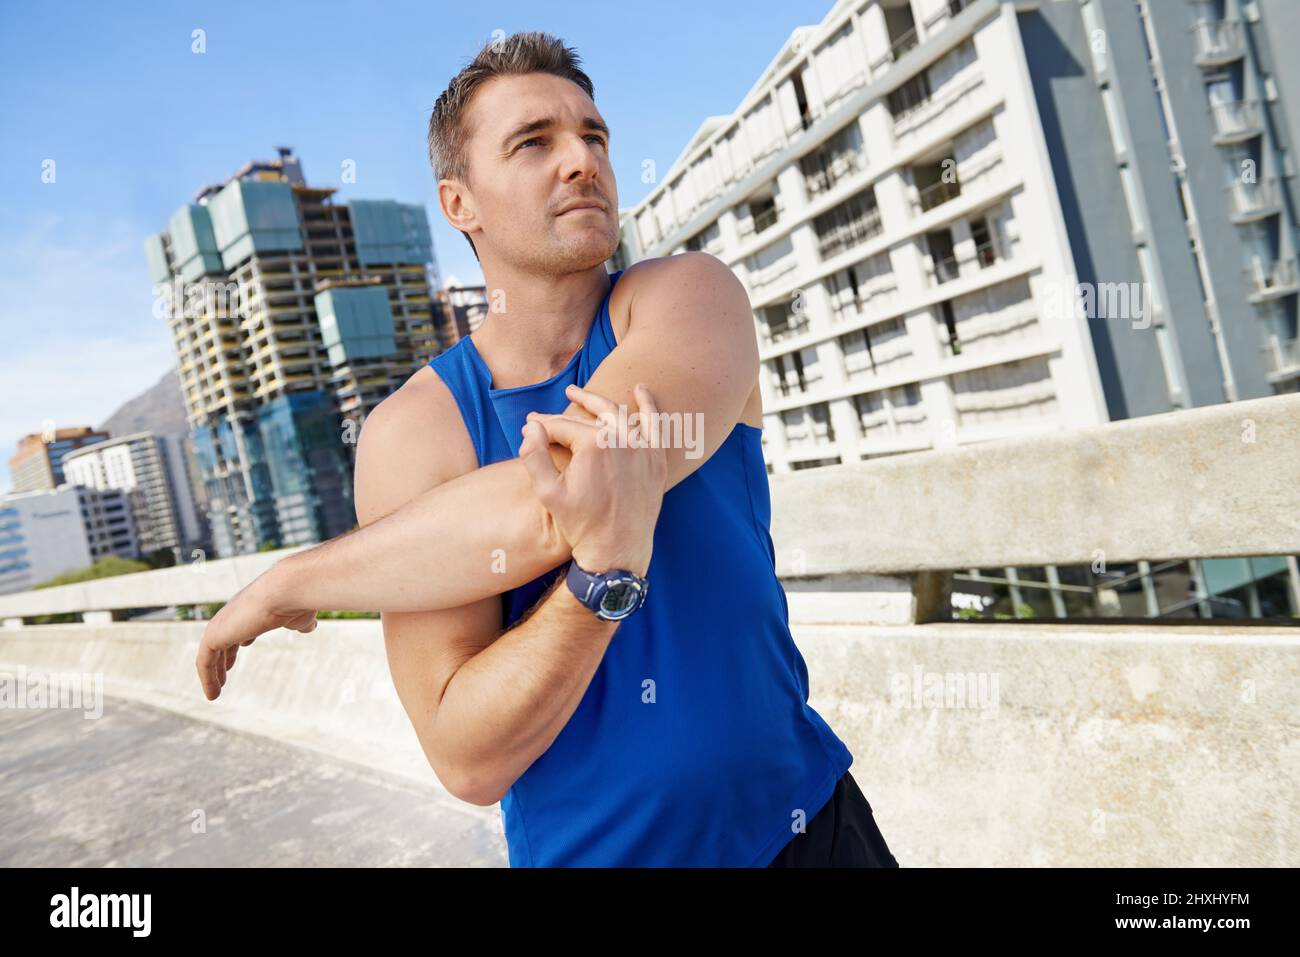 Stretching is important before exercise. Young runner stretching his shoulder before a run. Stock Photo